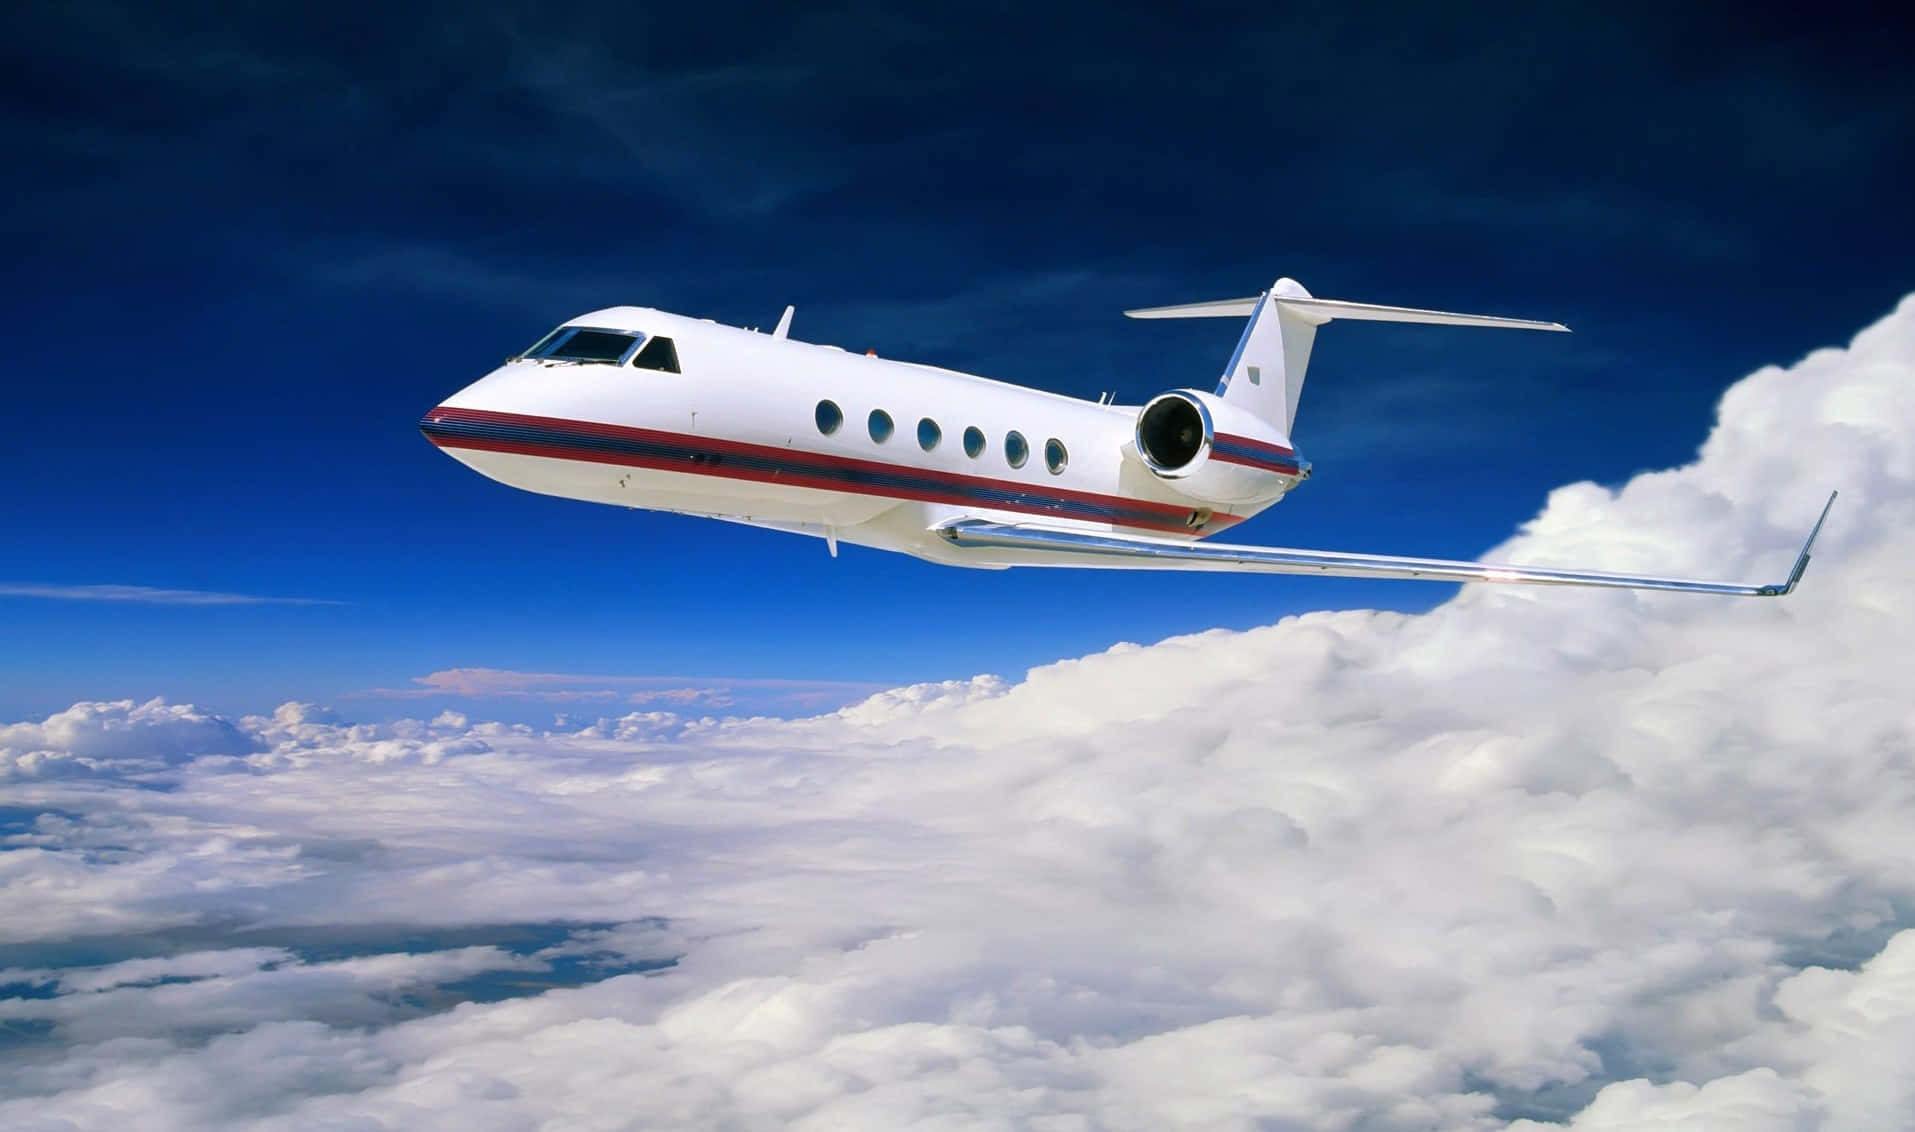 Private Jet Over Clouds Wallpaper